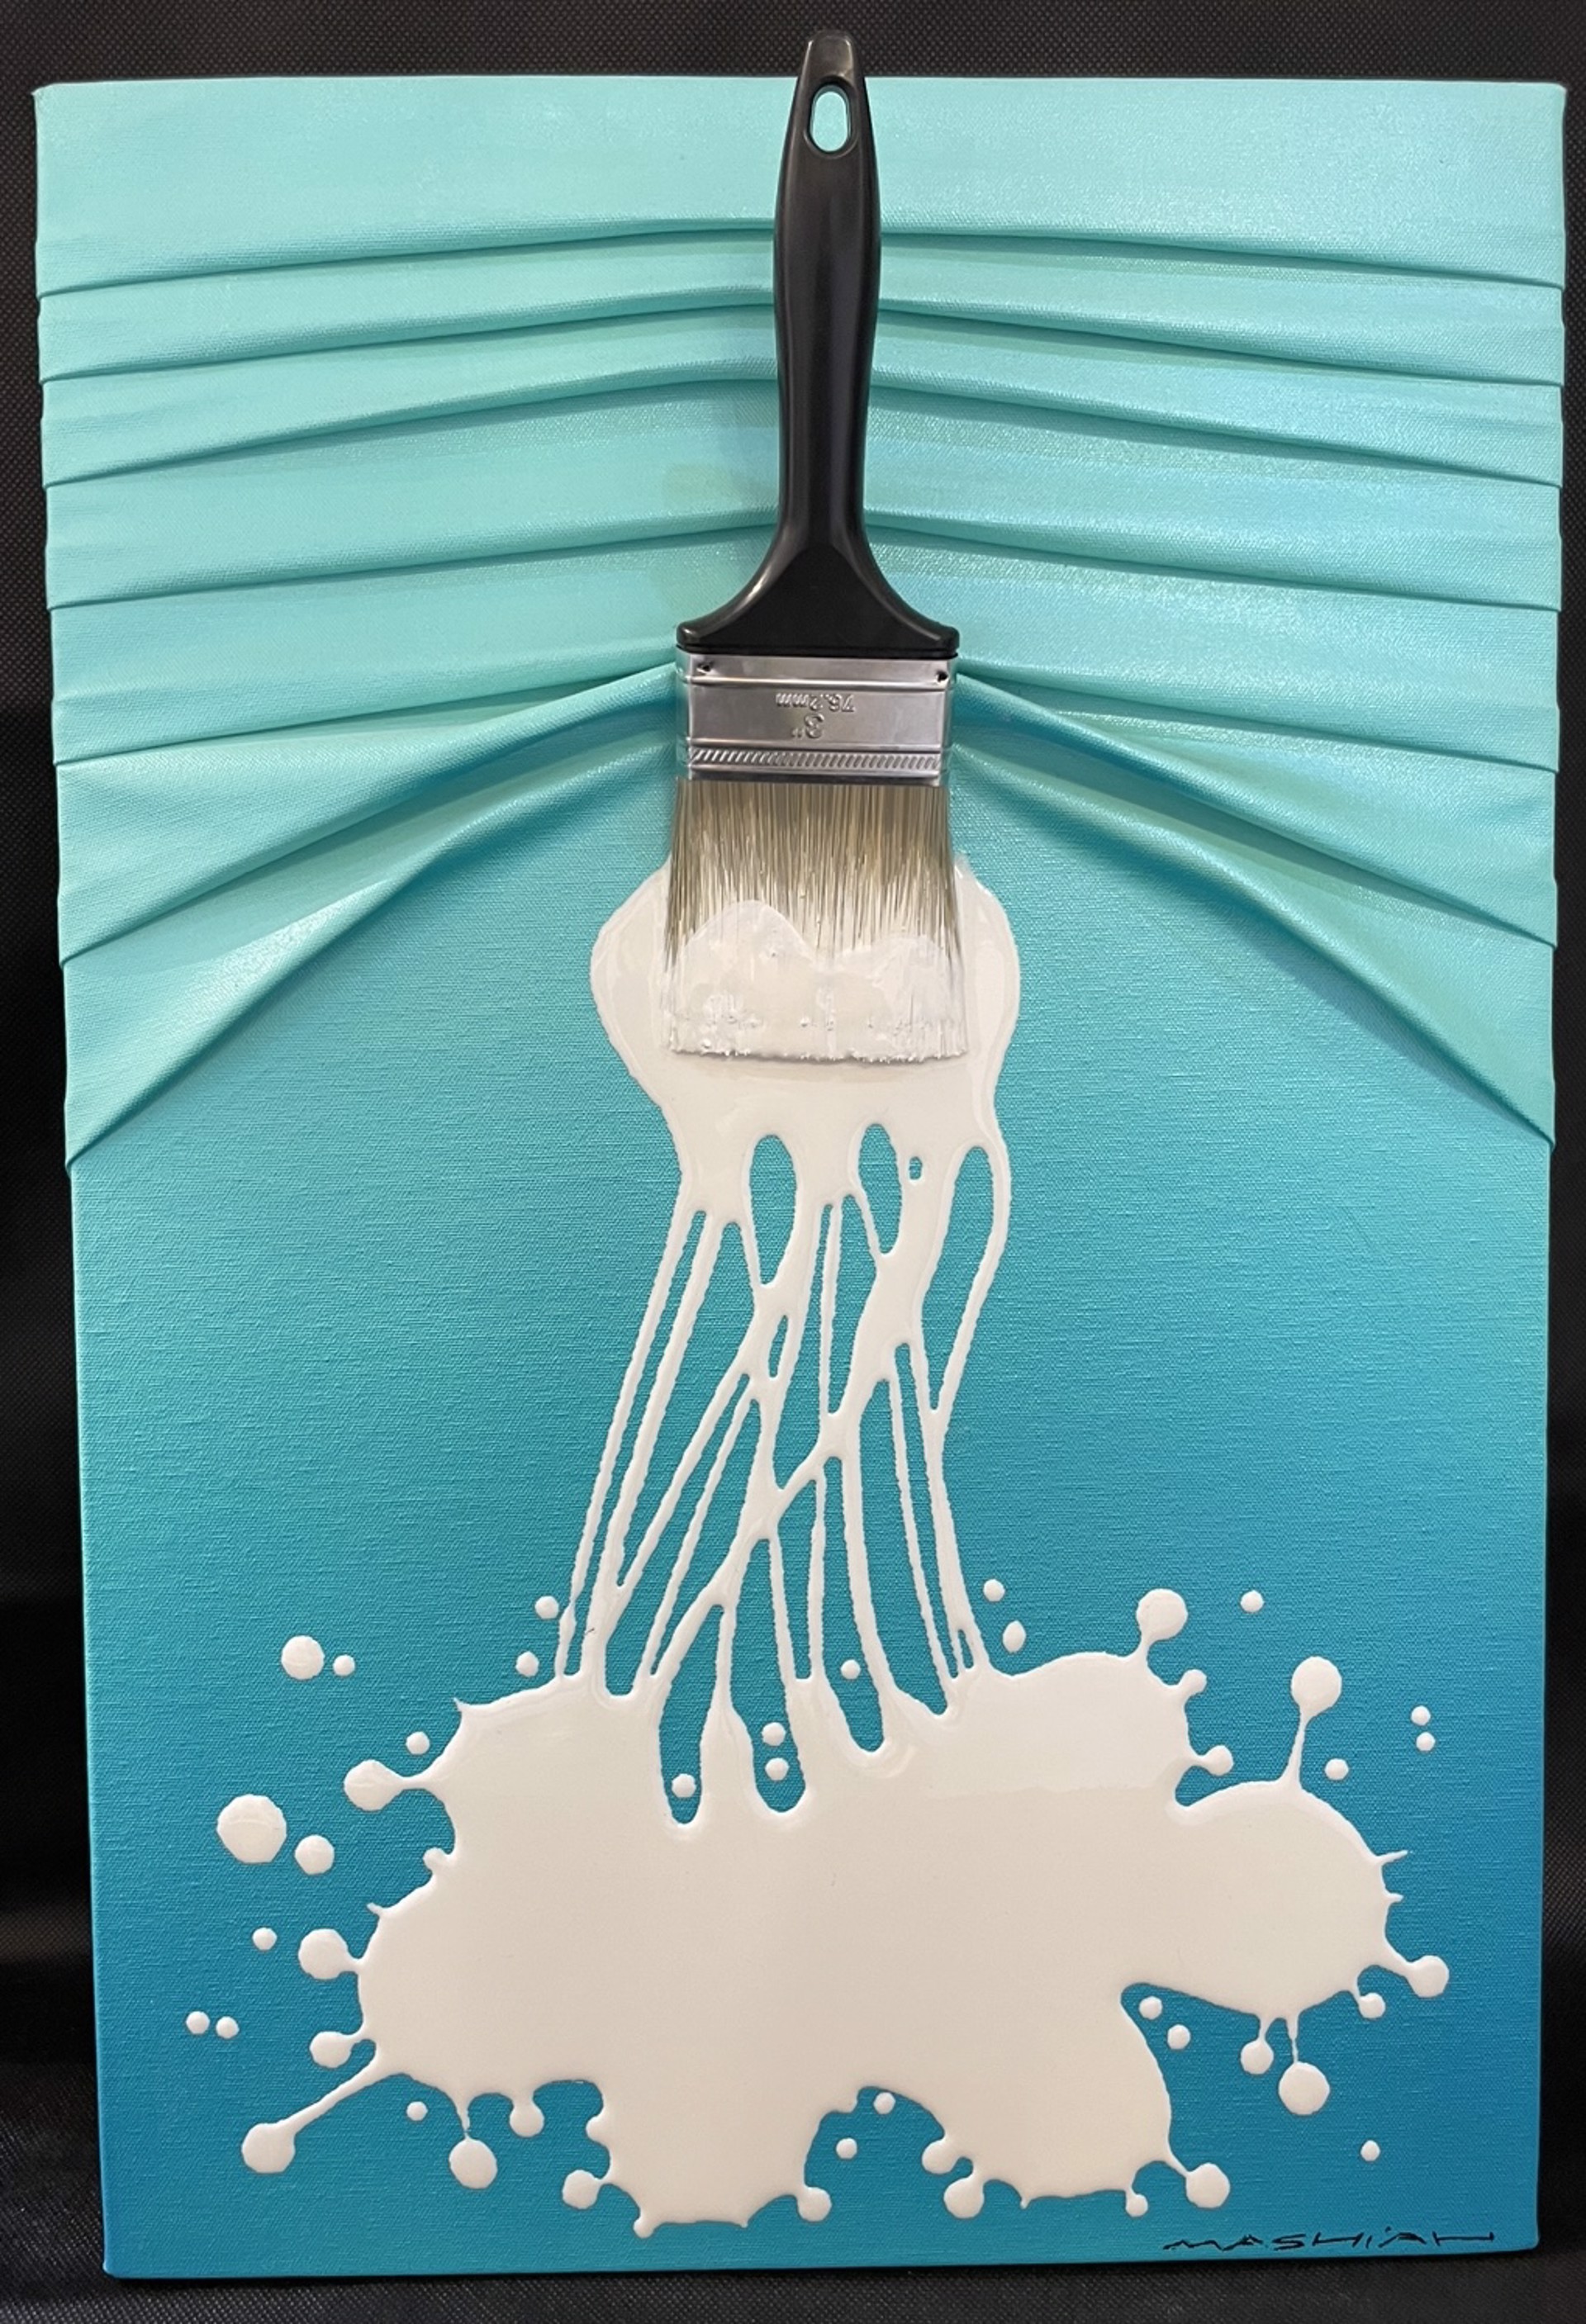 White Splash on the Teal Canvas by Brushes and Rollers "Let's Paint" by Efi Mashiah